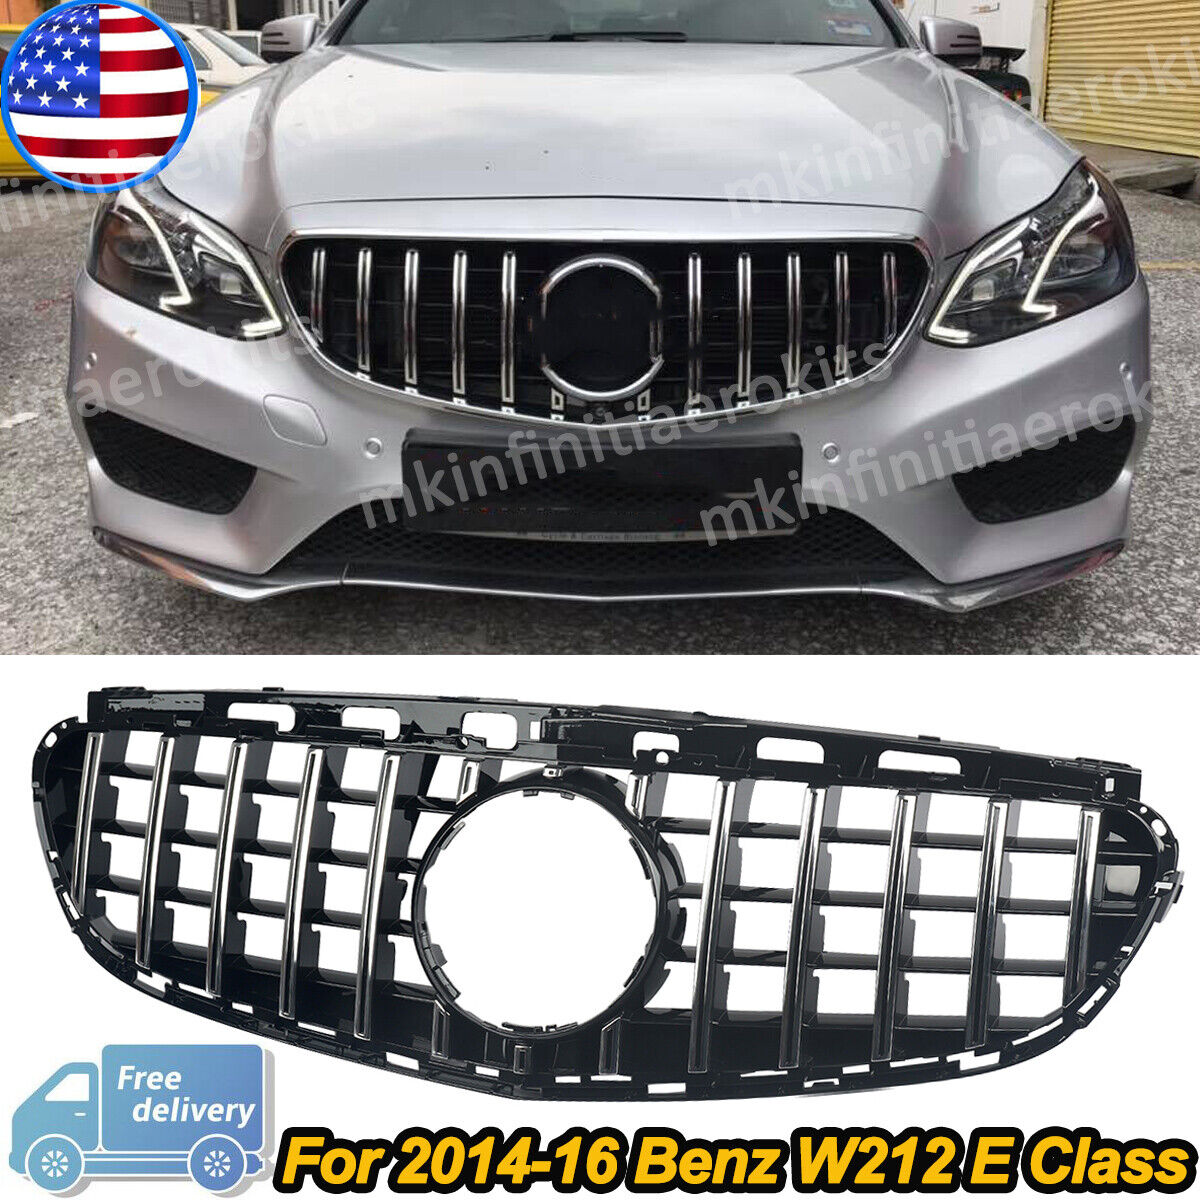 Chrome+Black GT Style Front Grille Grille For 2014-2016 Mercedes W212 E300 E350